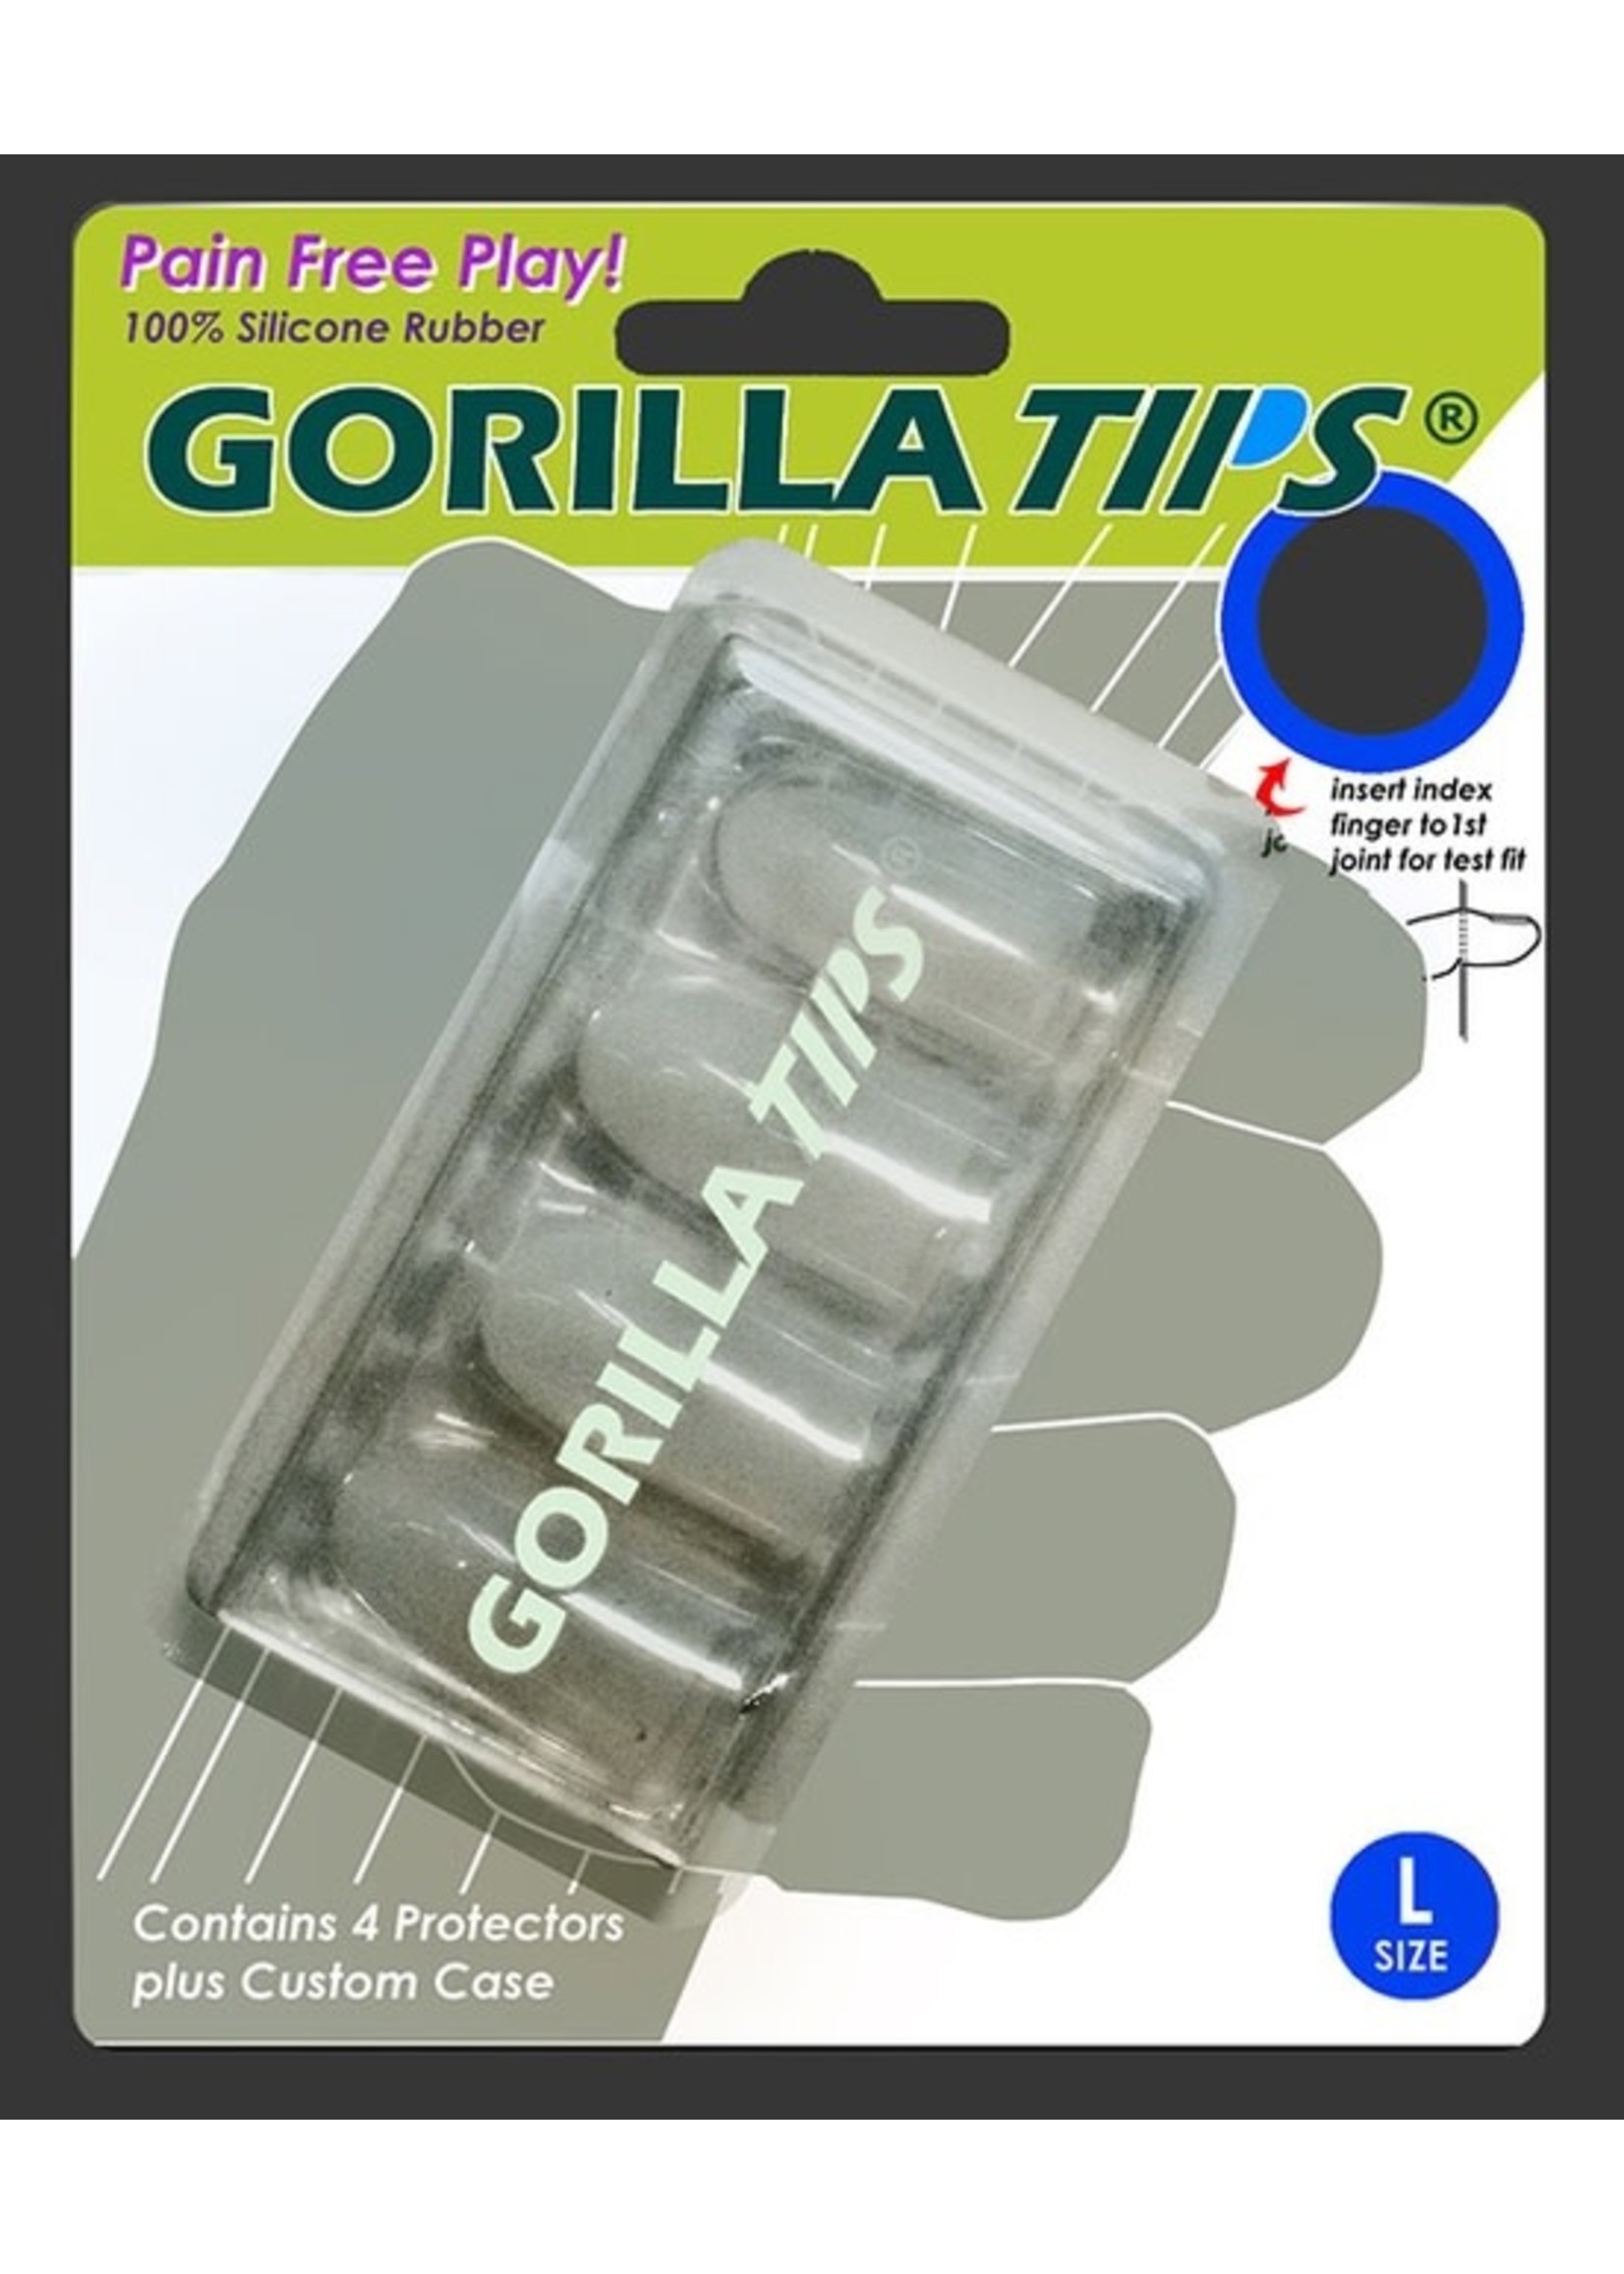 Alfred Gorilla Tips Fingertip Protectors Clear Size Large